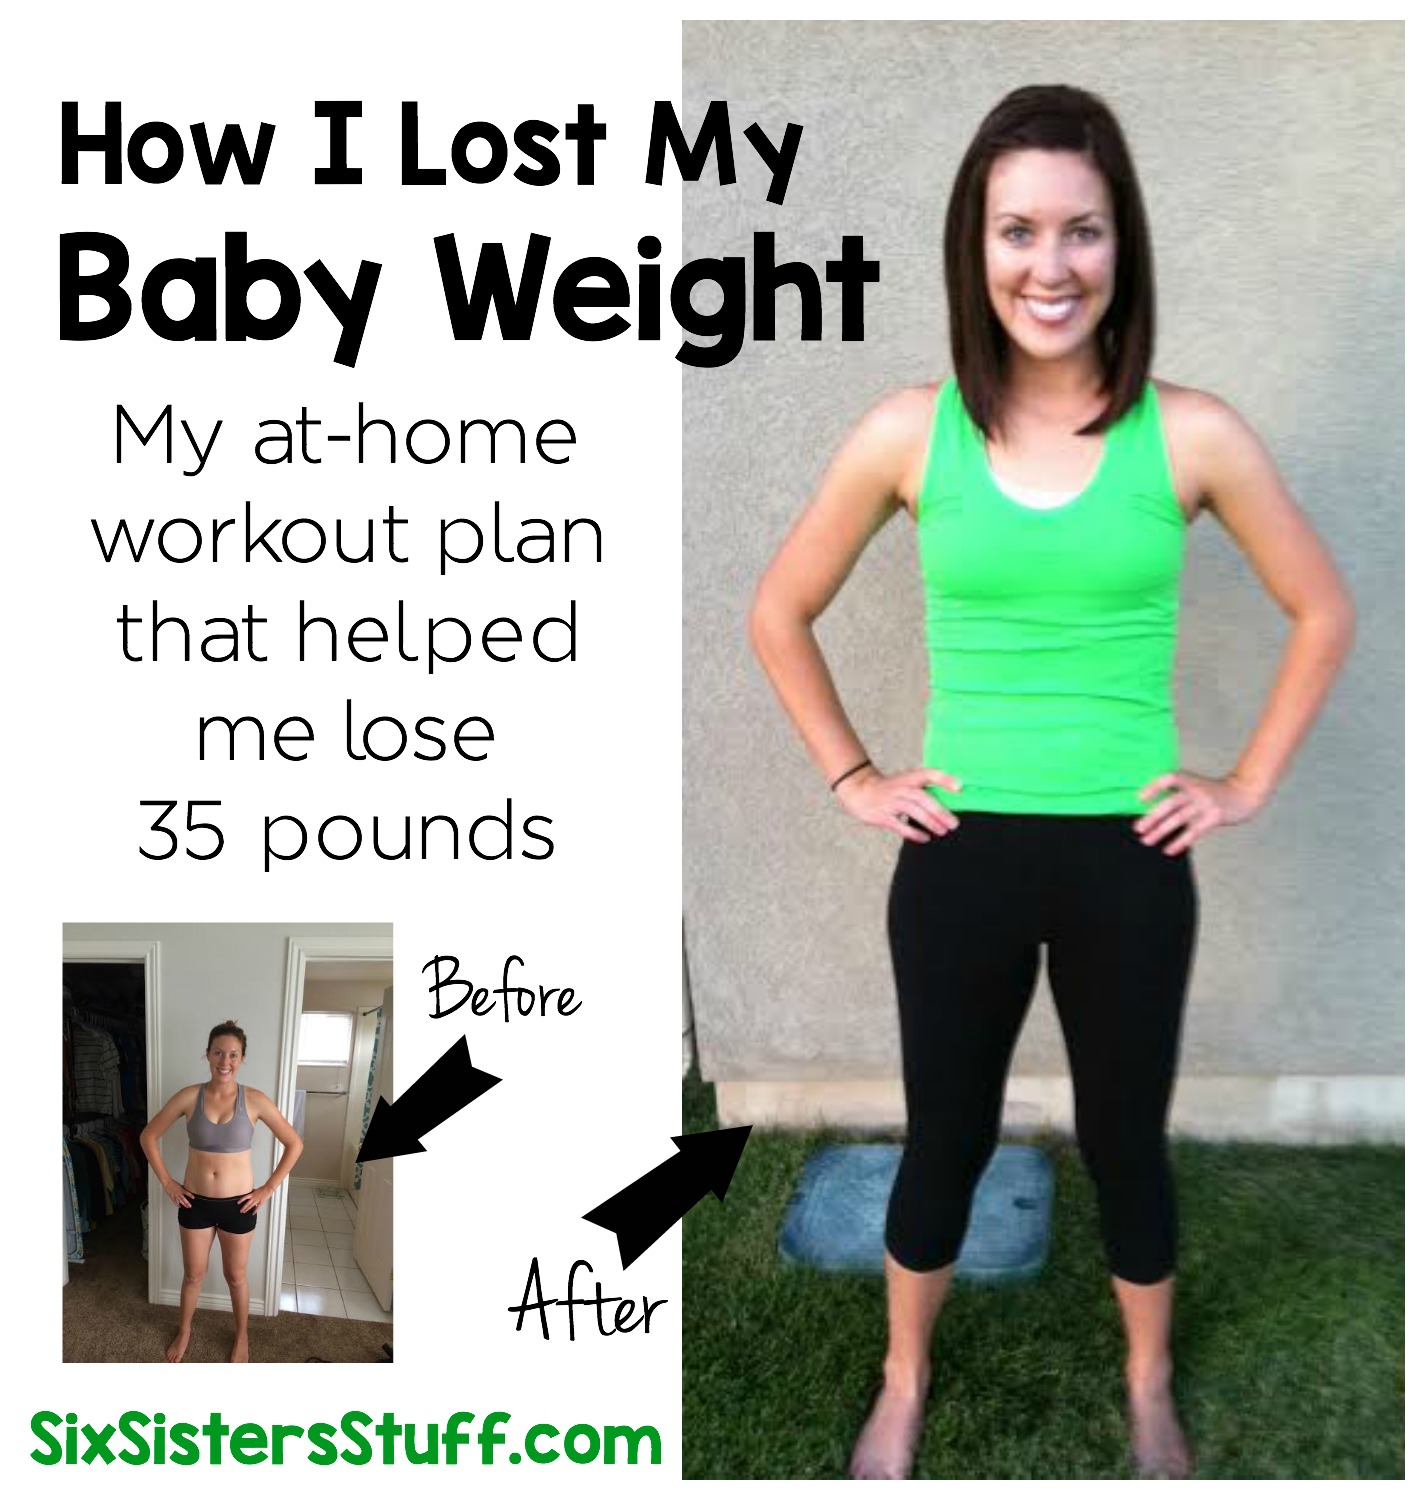 How I Lost My Baby Weight on SixSistersStuff